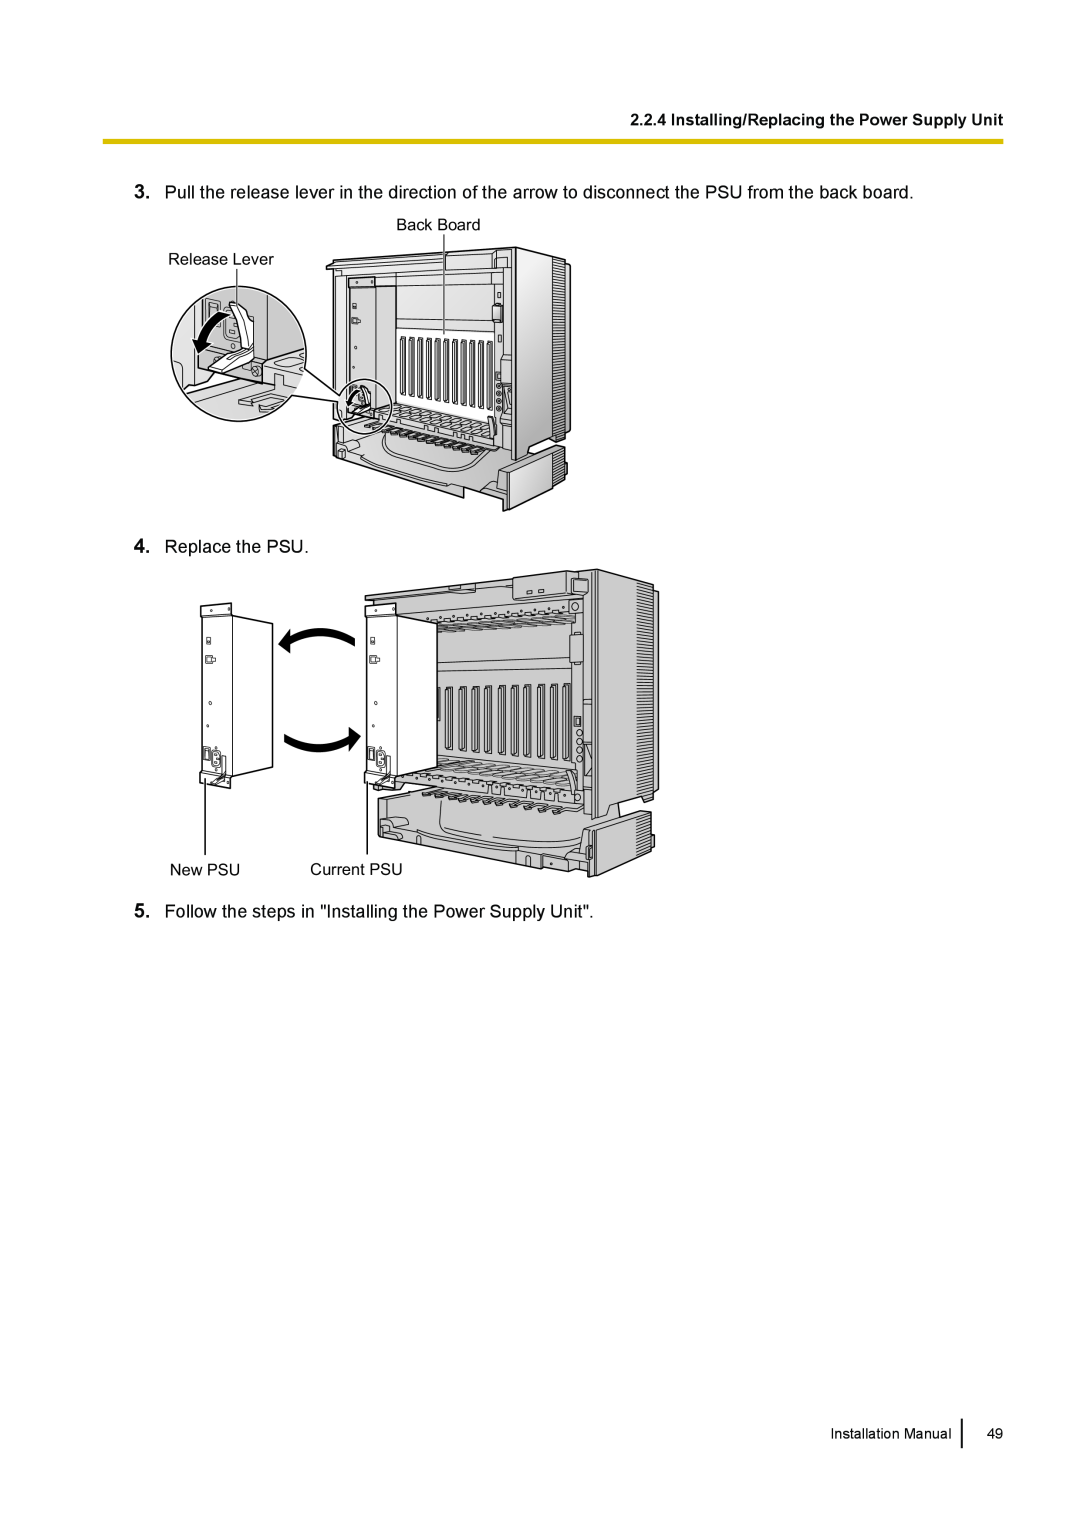 Panasonic KX-TDA100 installation manual Replace the PSU, Follow the steps in Installing the Power Supply Unit 